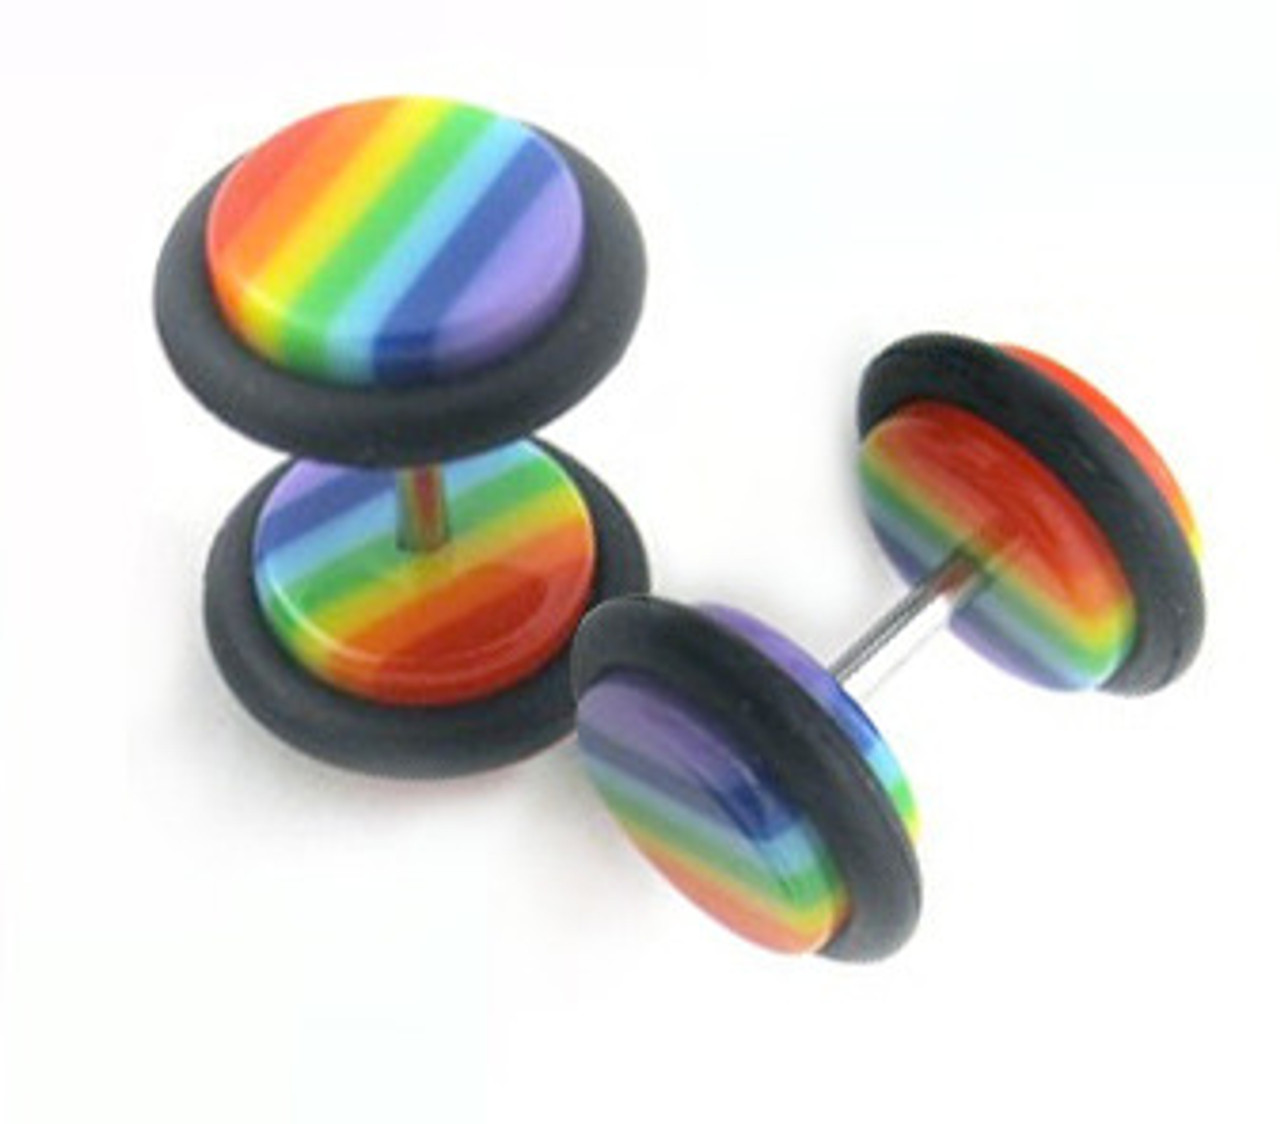 Pair of Gay Pride Fake Plug Earrings with O-Ring - Rainbow Gay and Lesbian Pride Body jewelry, gay earrings, rainbow earrings, gay flag earrings, pride earrings, lesbian earrings, gay mens earrings 